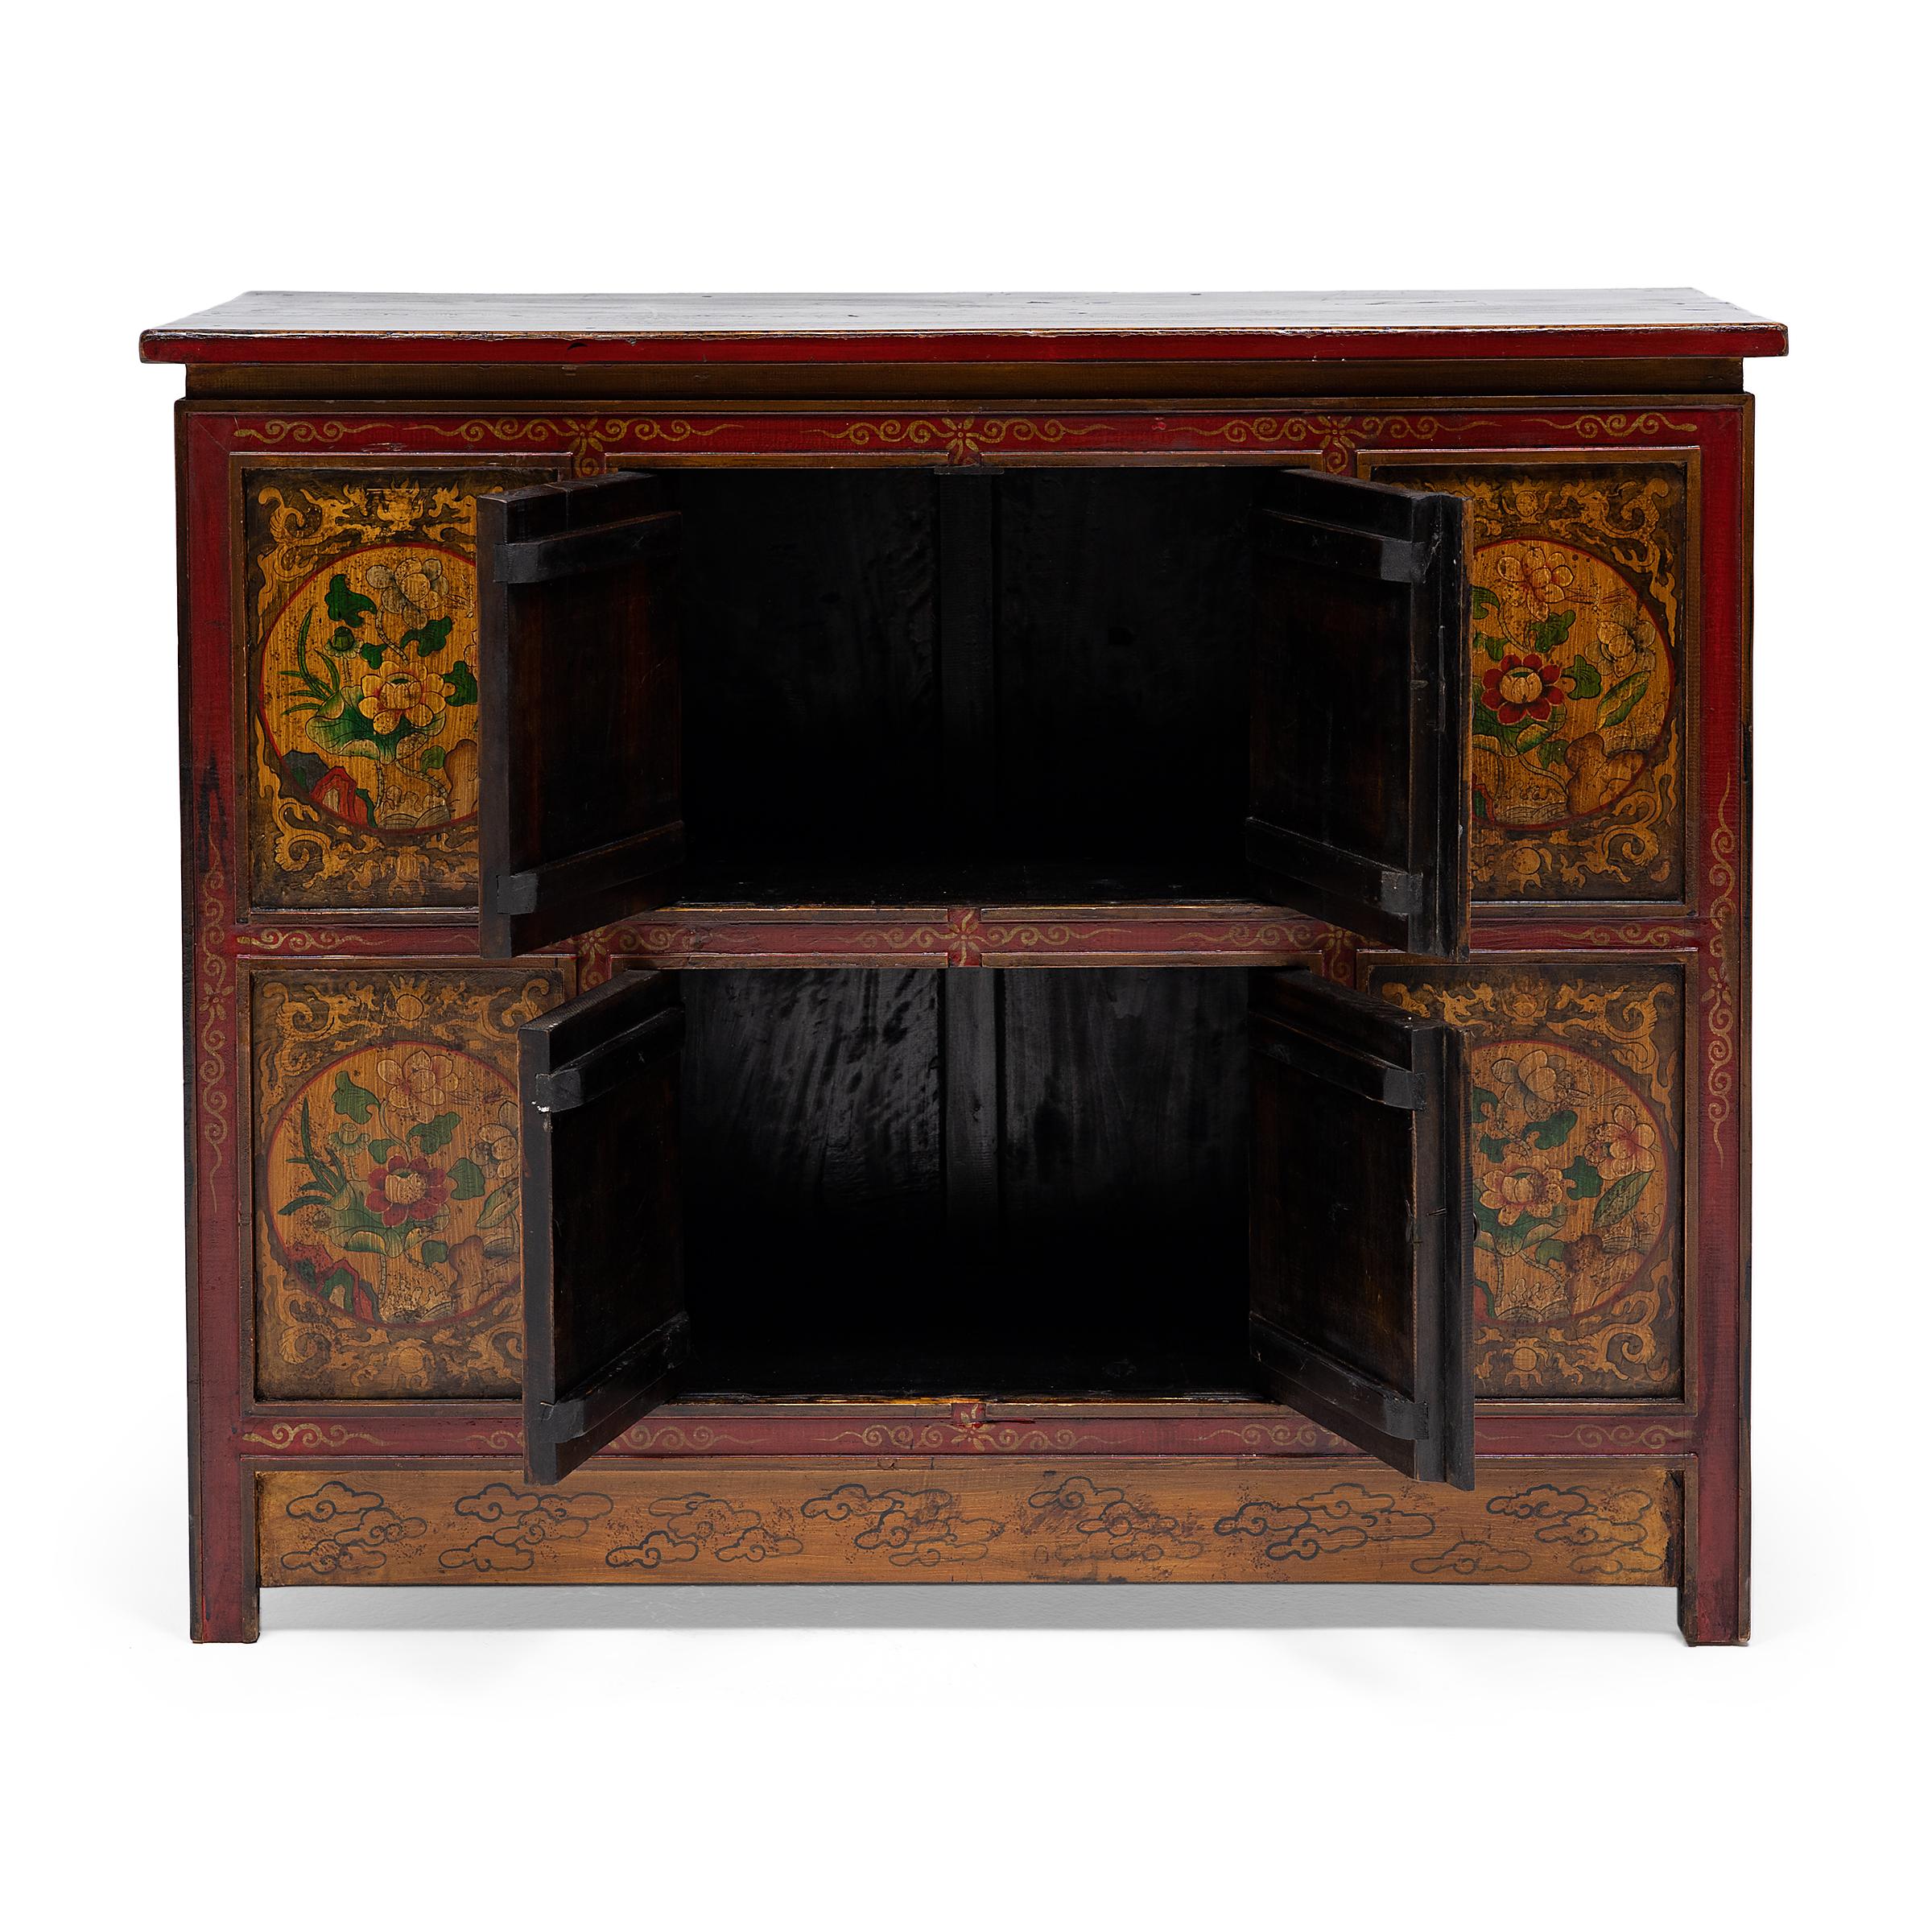 Wood Tibetan Red and Gold Painted Cabinet, c. 1900 For Sale